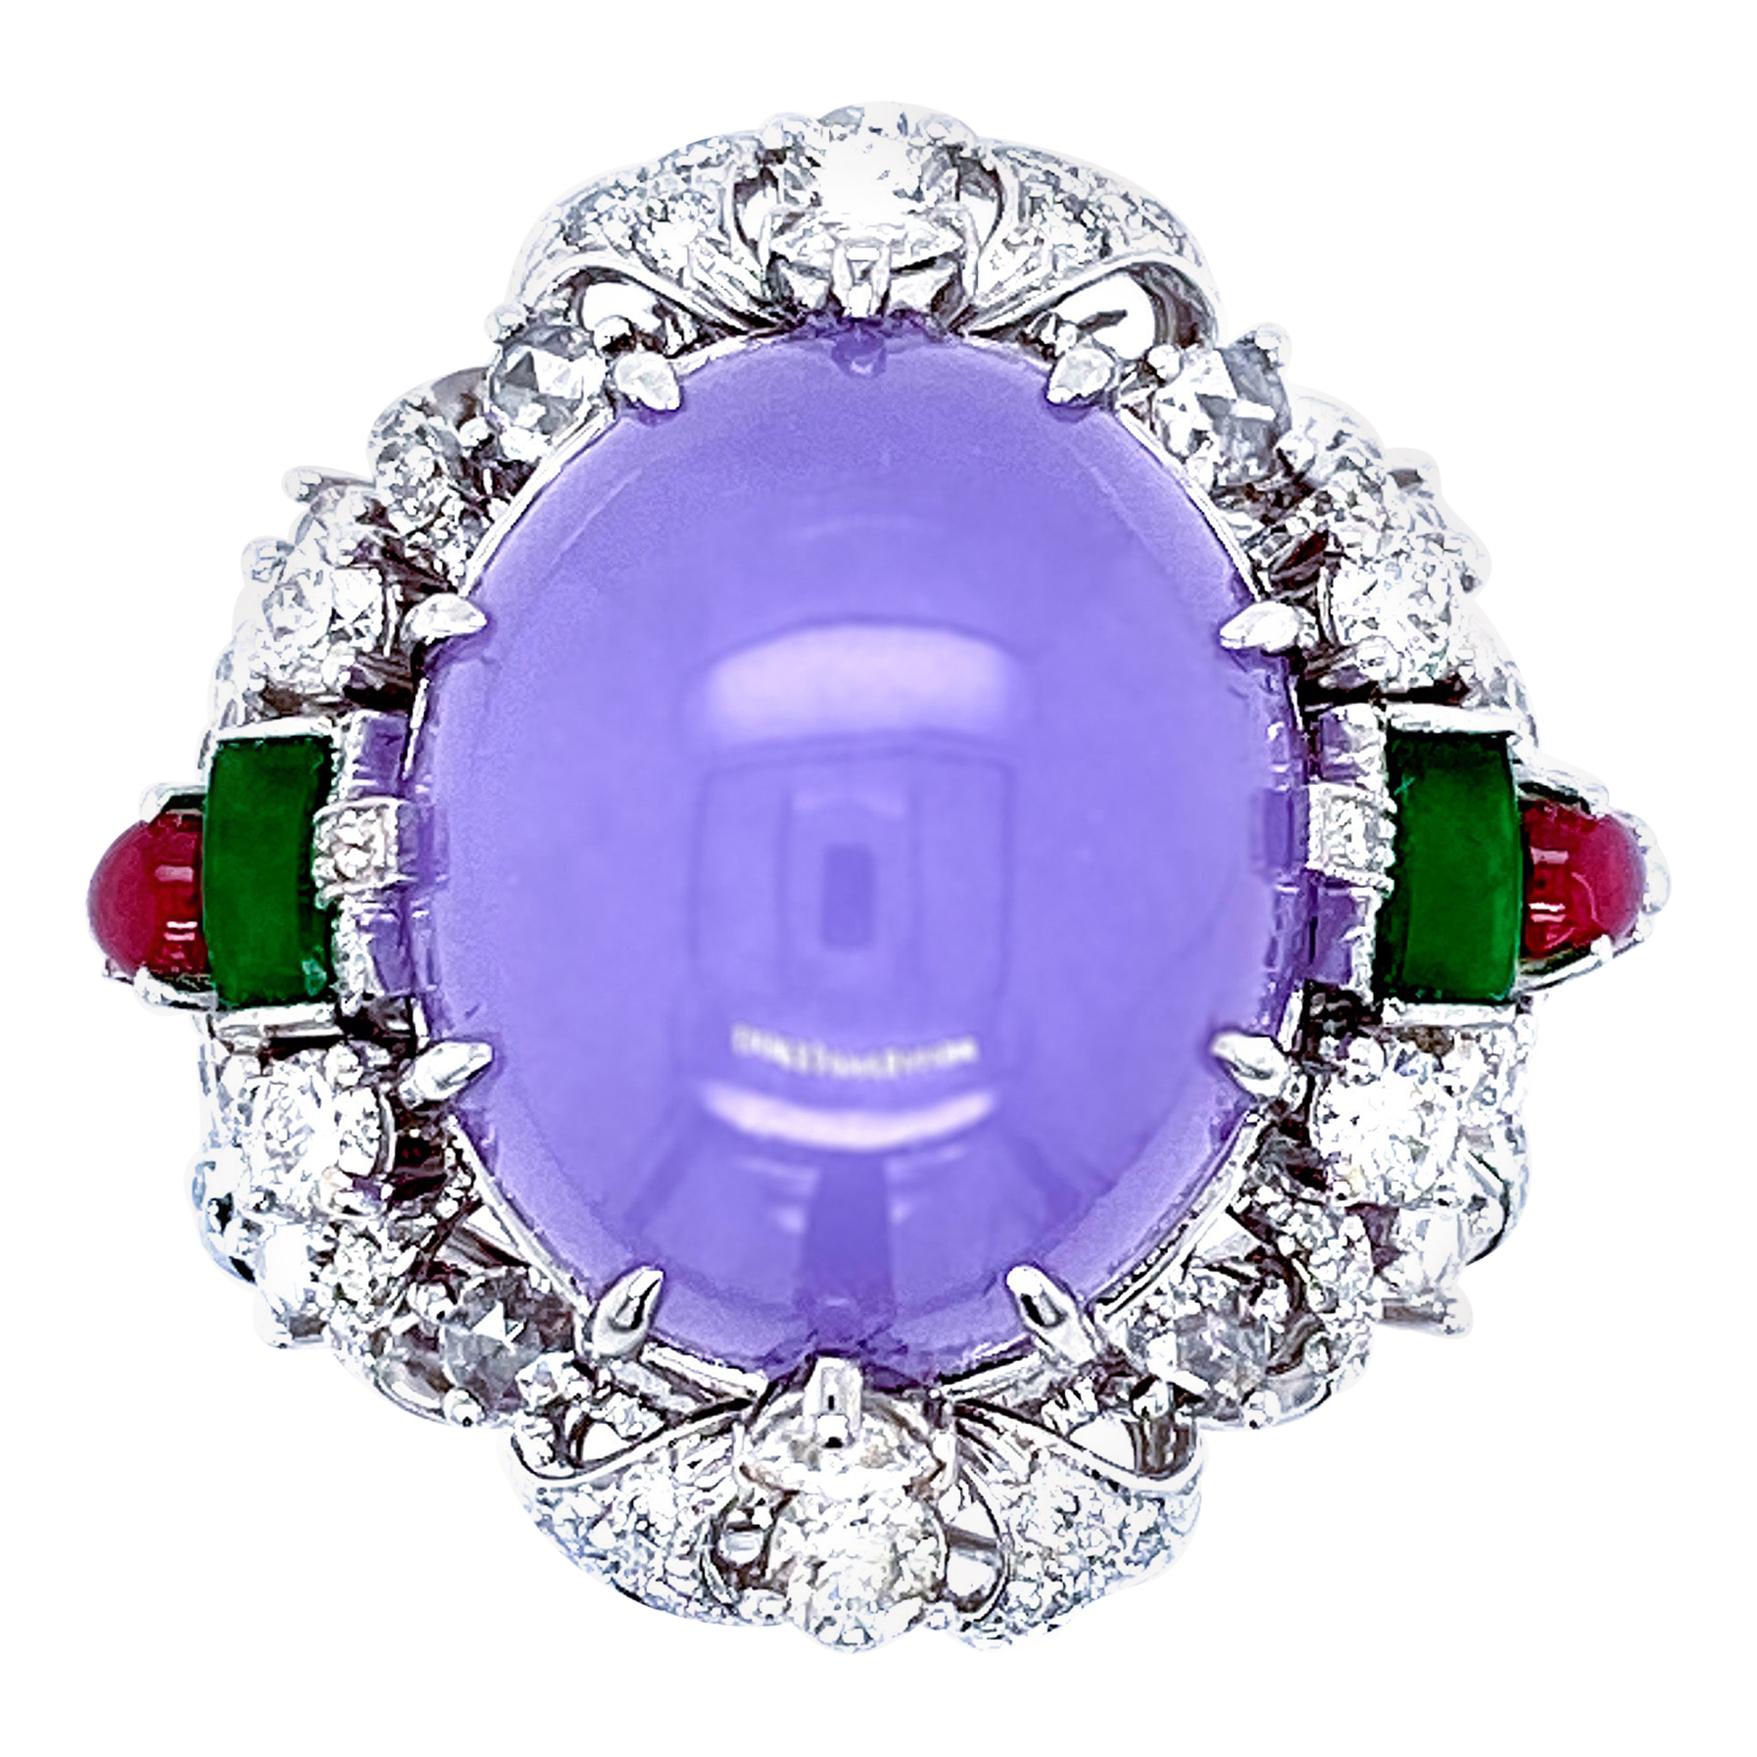 Transformable 19.41 Carat Certified Lavender Jadeite Collectible Ring